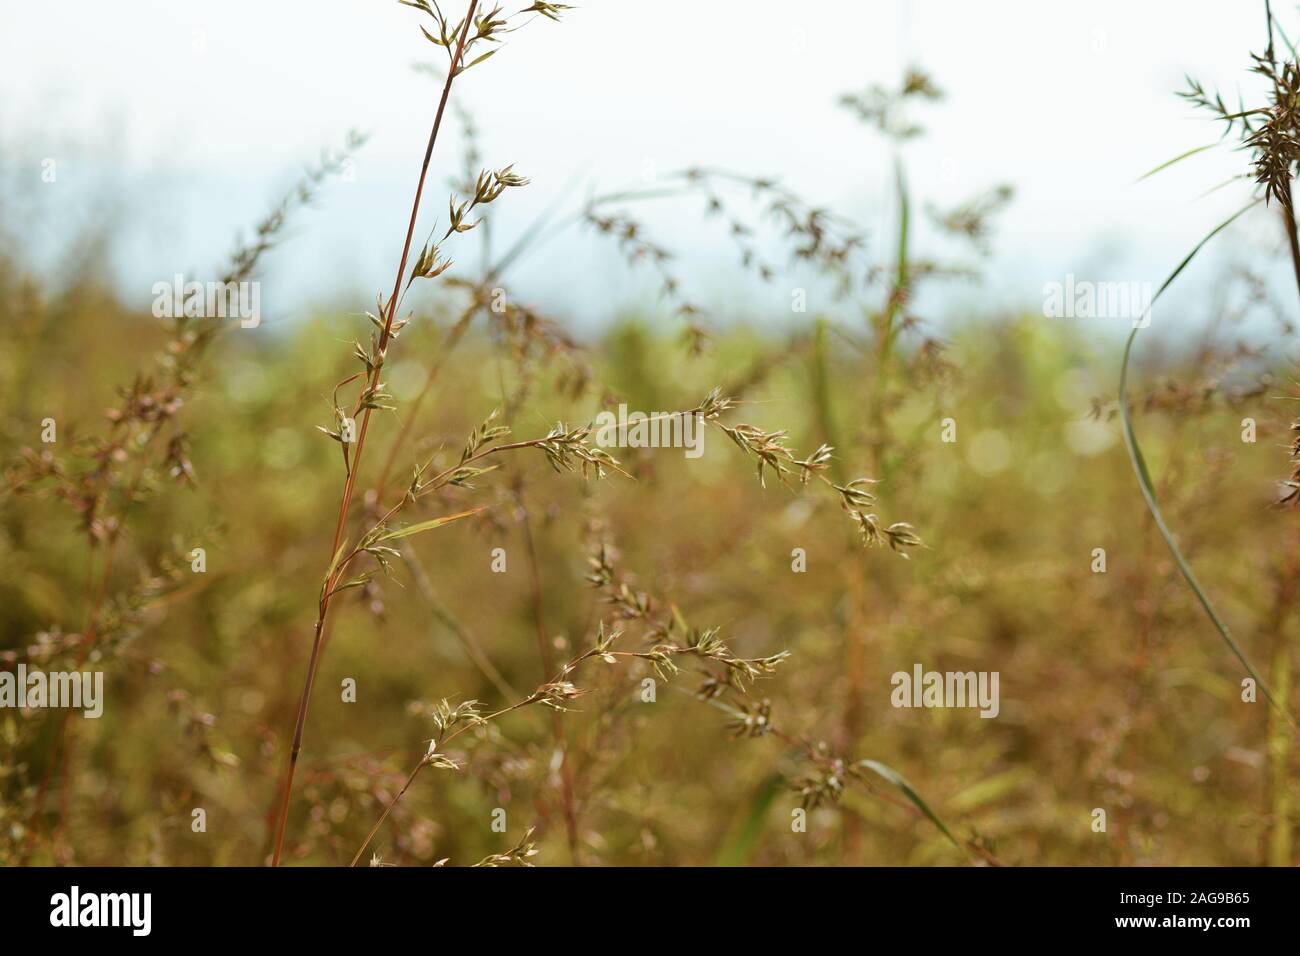 Closeup selective focus shot of Hierochloe odorata aromatic herbs growing in the middle of a field Stock Photo